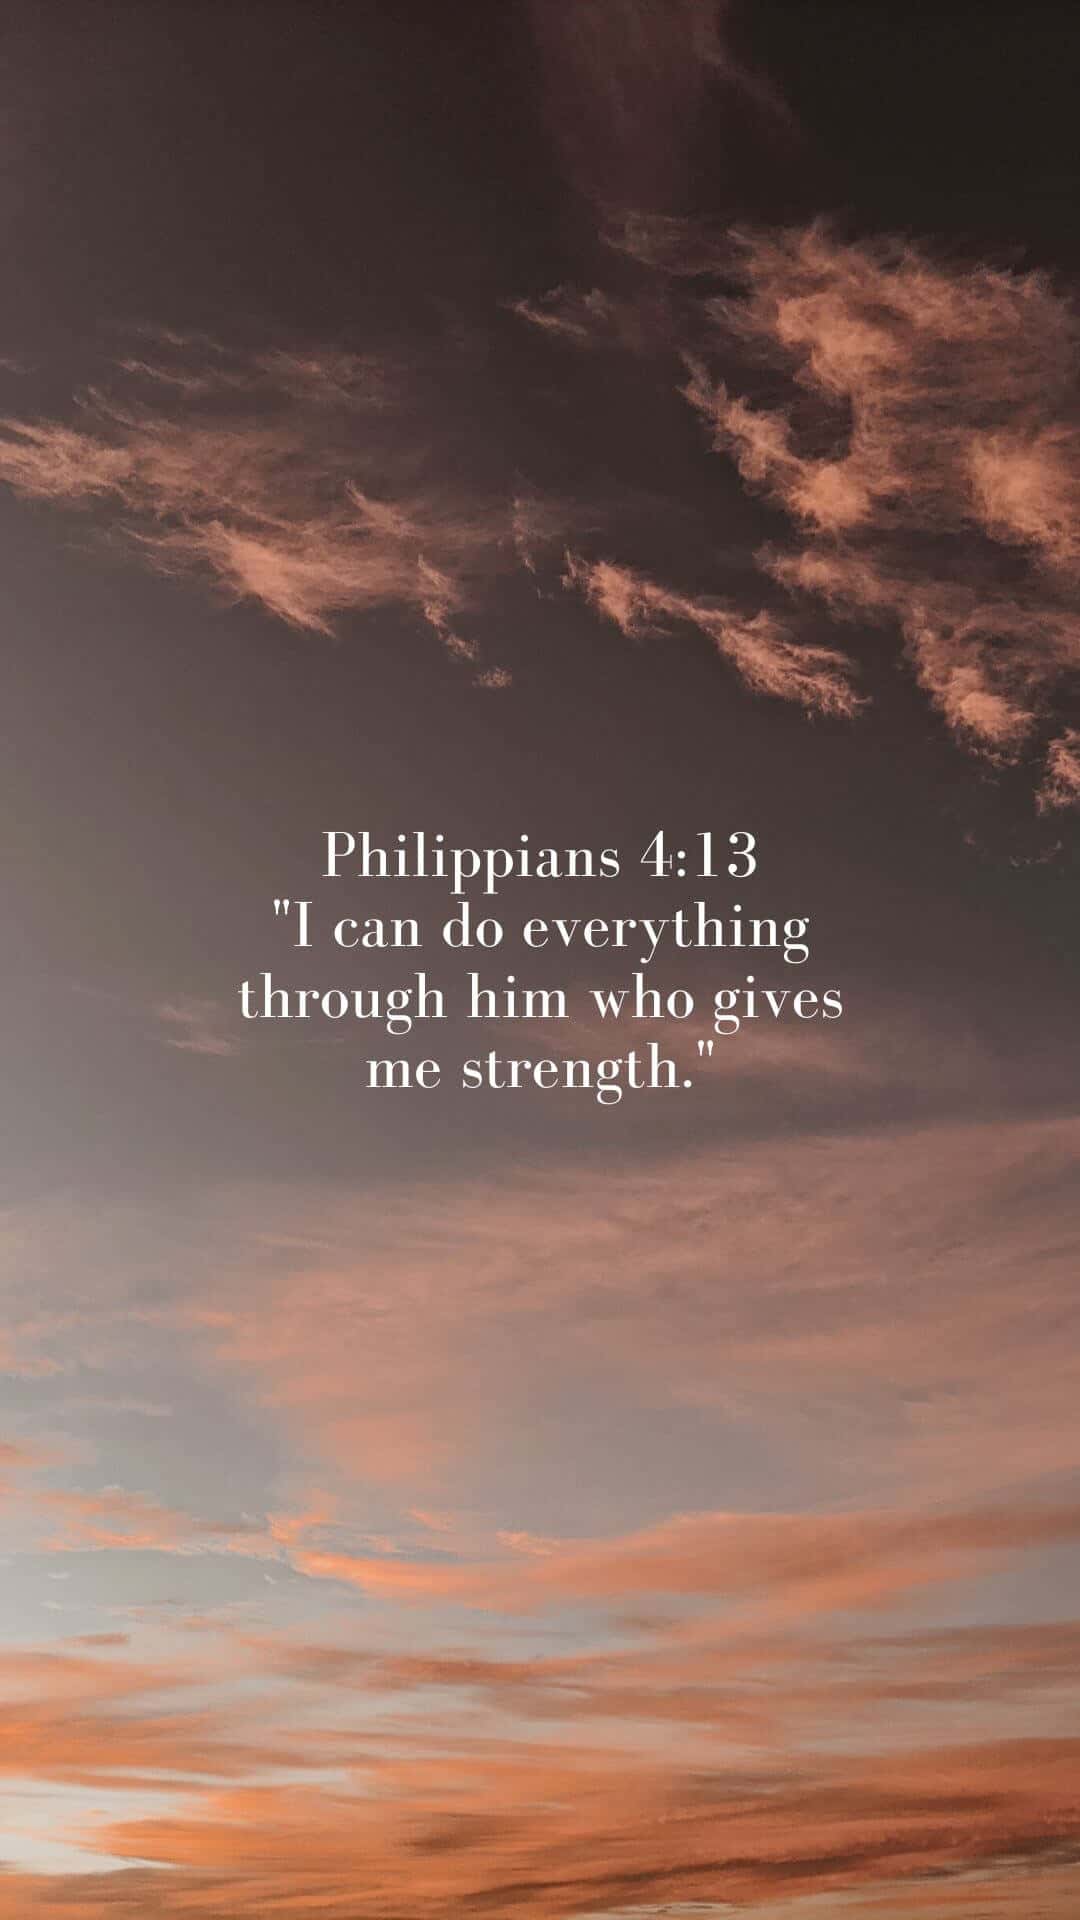 6. Philippians 4:13: "I can do everything through him who gives me strength."